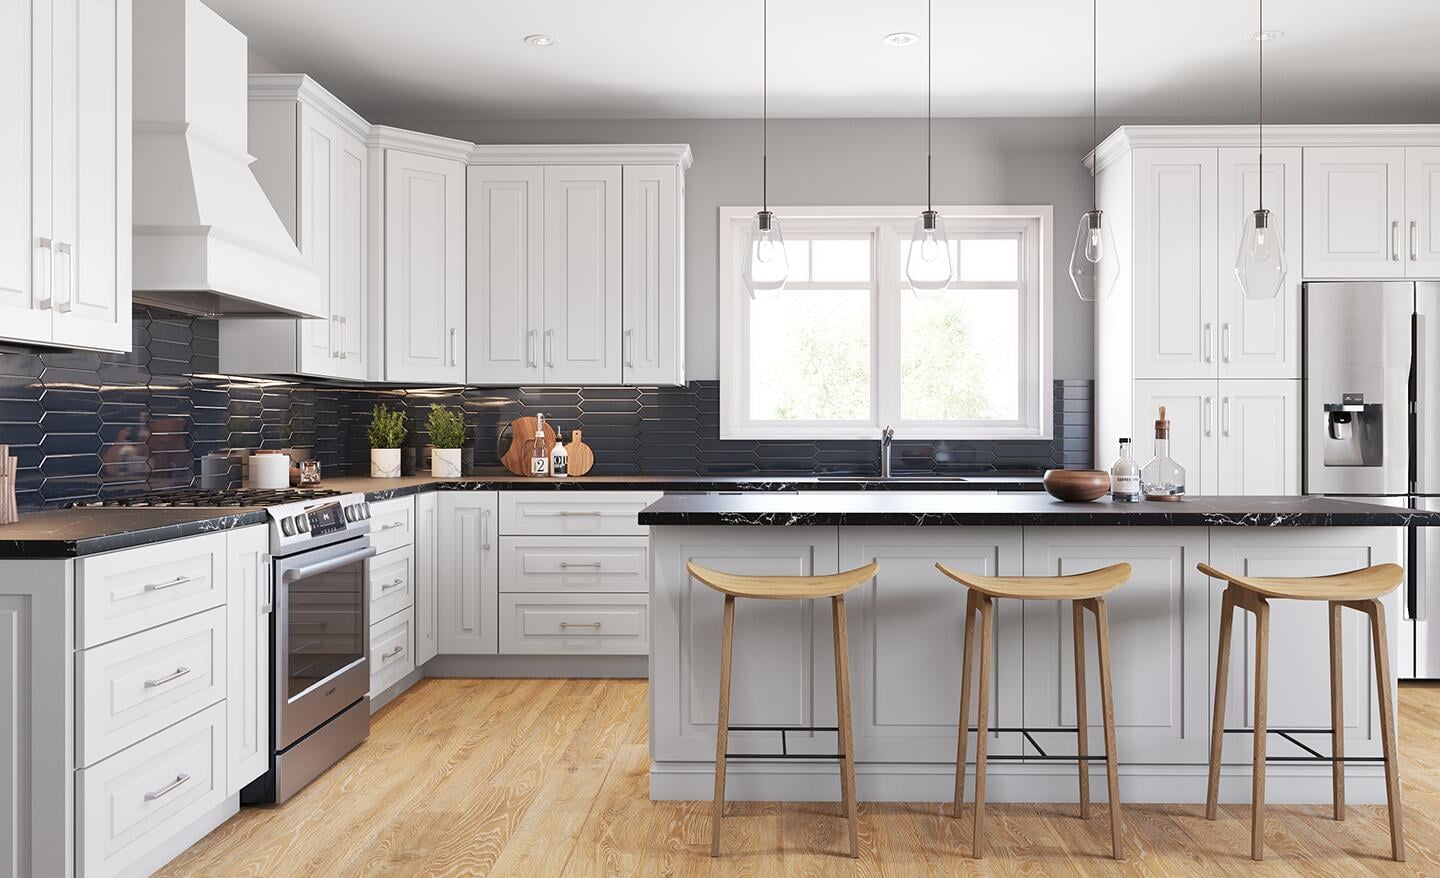 A kitchen featuring shaker white cabinets and island.